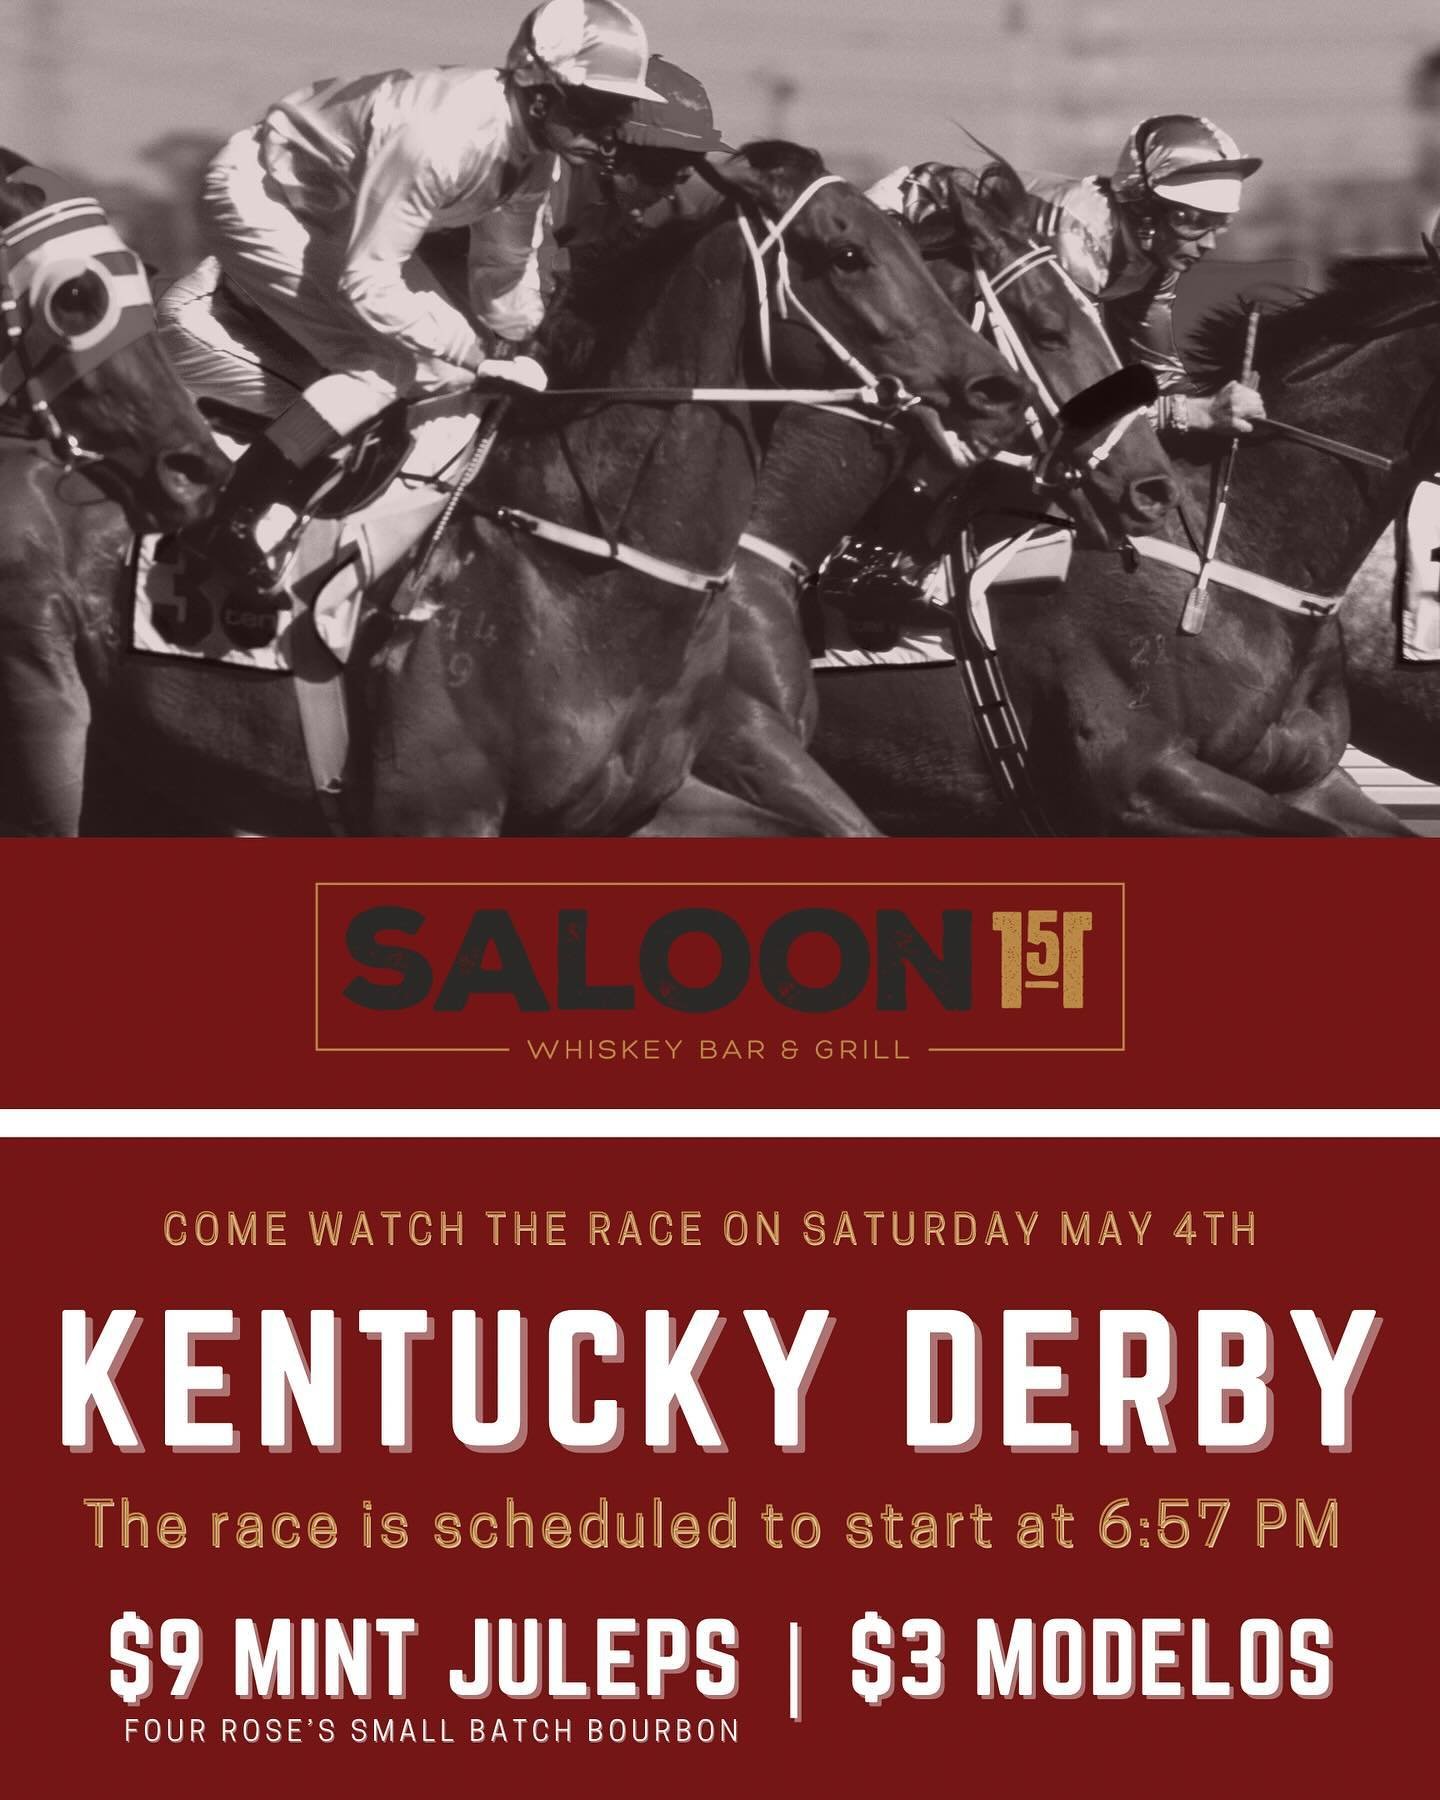 The 2024 Kentucky Derby is the 150th renewal of The Greatest Two Minutes in Sports and will run on May 4th, 2024. Come have a Mint Julep w/ us &amp; wear your fancy hat 👒 #kentuckyderby #kentuckyderbyhats #westchesterpa #downtownwestchesterpa #wcupa